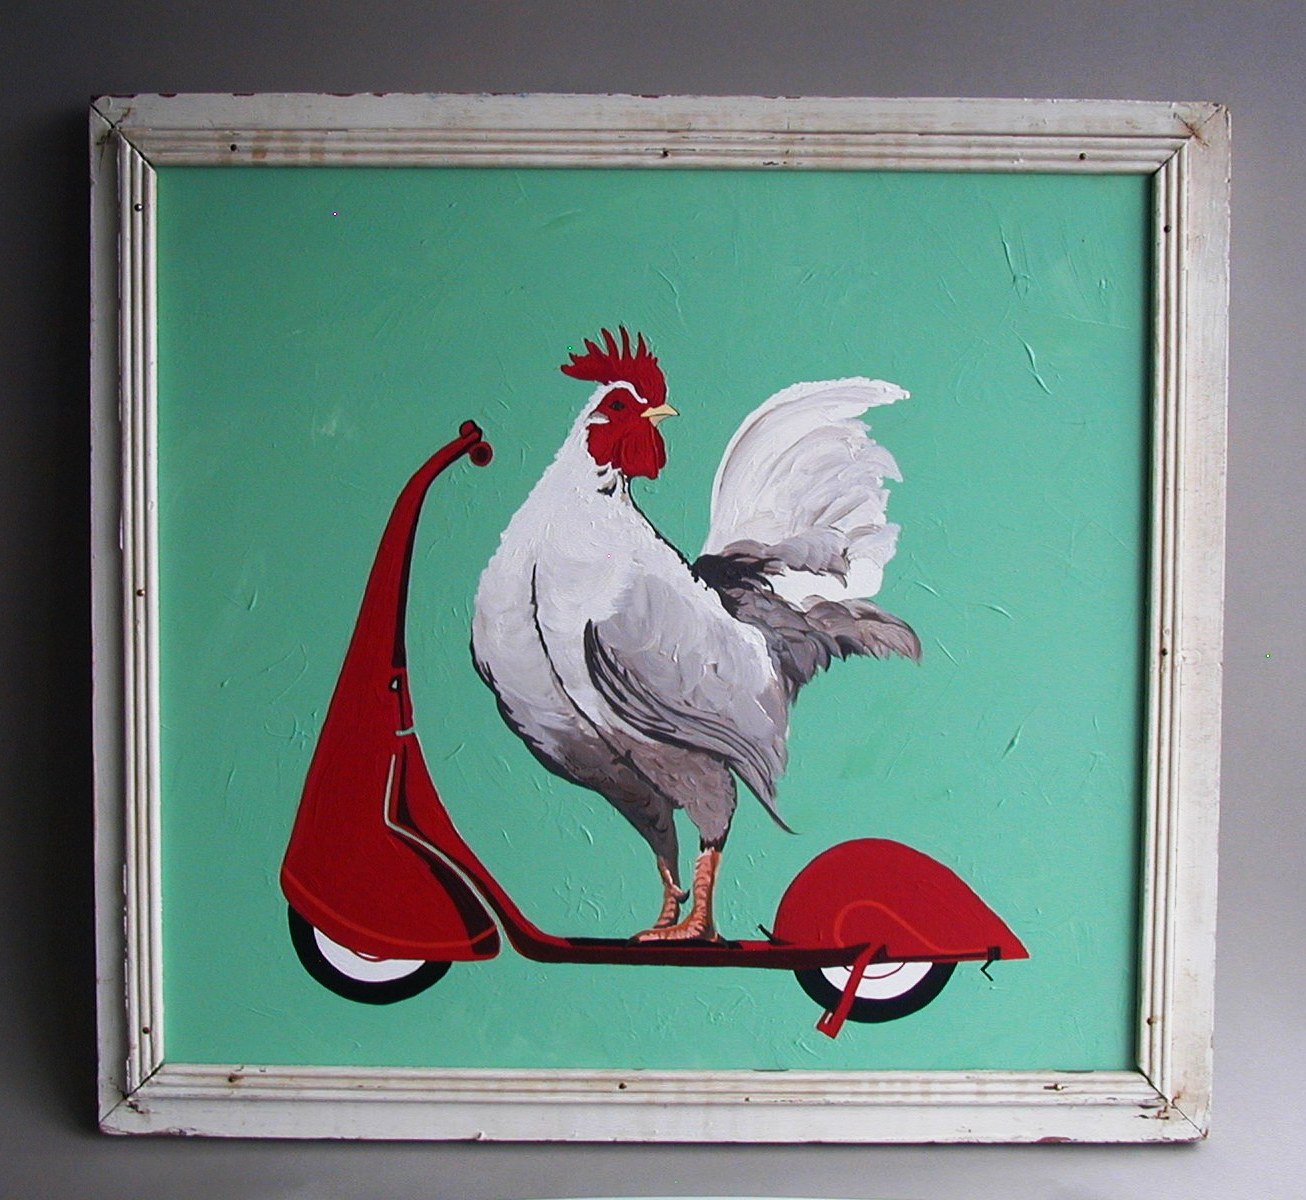 060-Acrylic_on_Wood_Chicken_on_Scooter.jpg